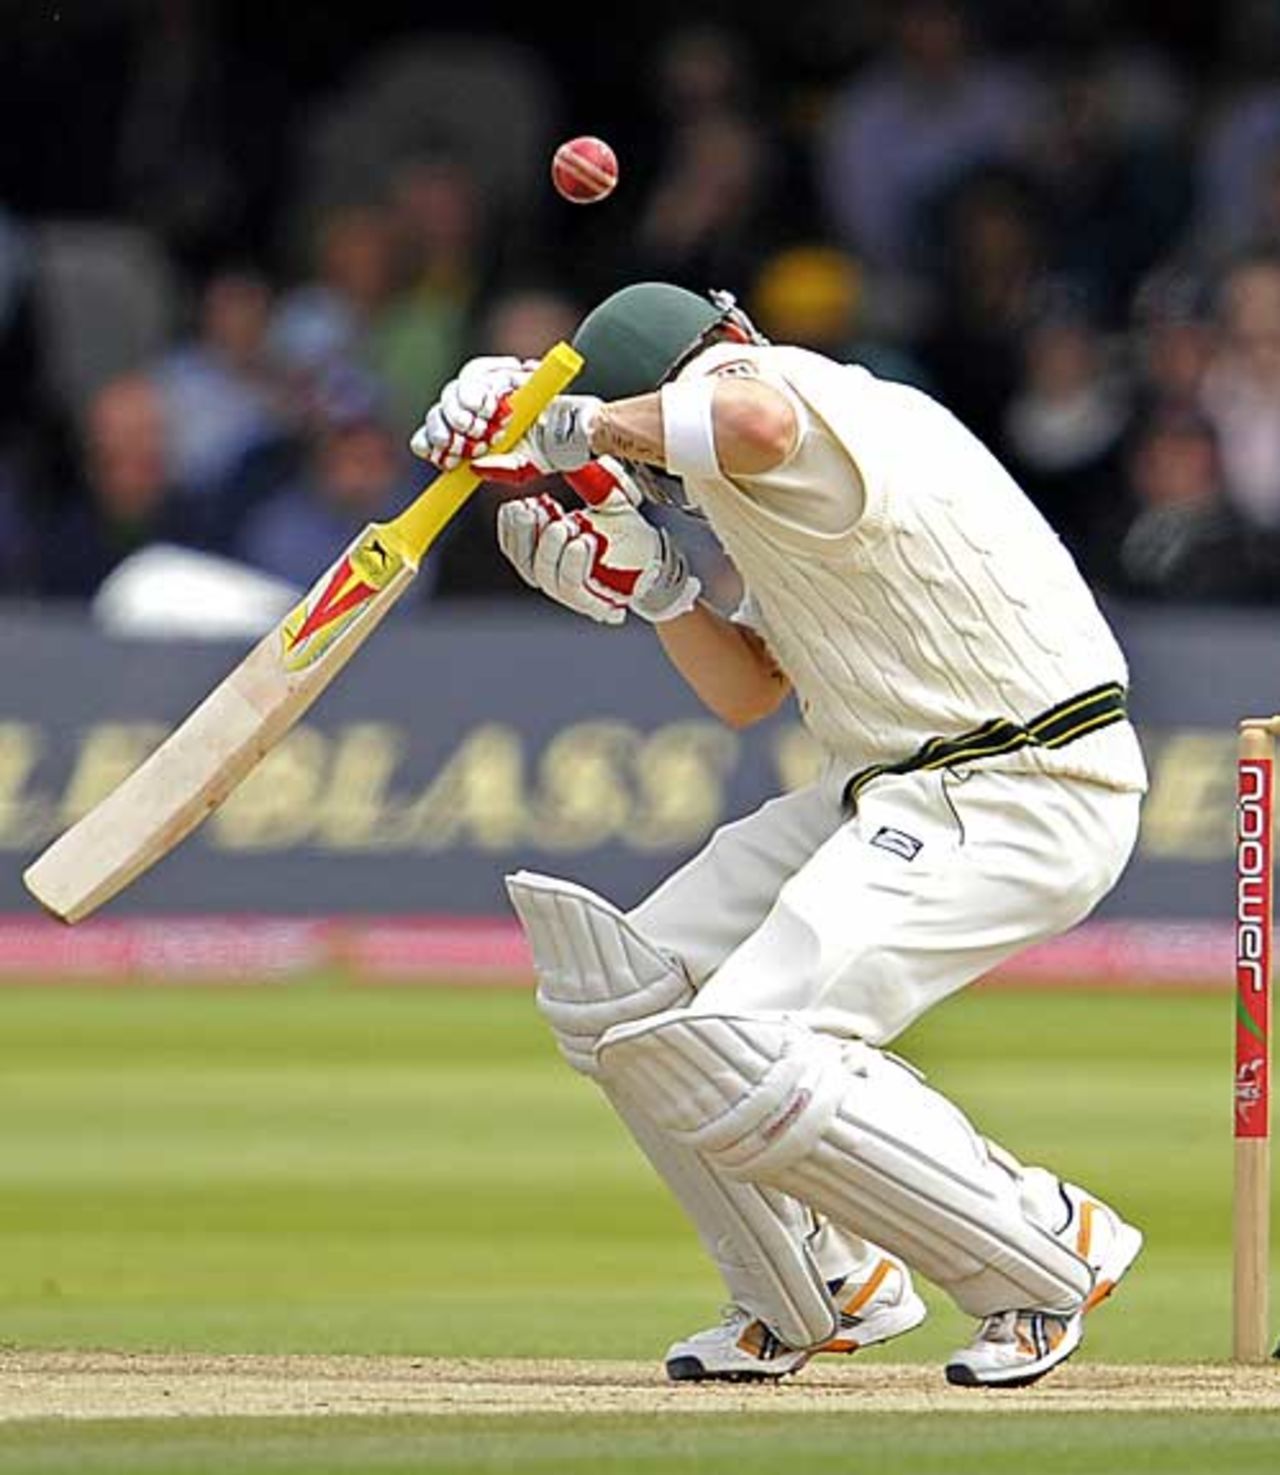 Michael Clarke took a blow from Andrew Flintoff, England v Australia, 2nd Test, Lord's, 5th day, July 20, 2009